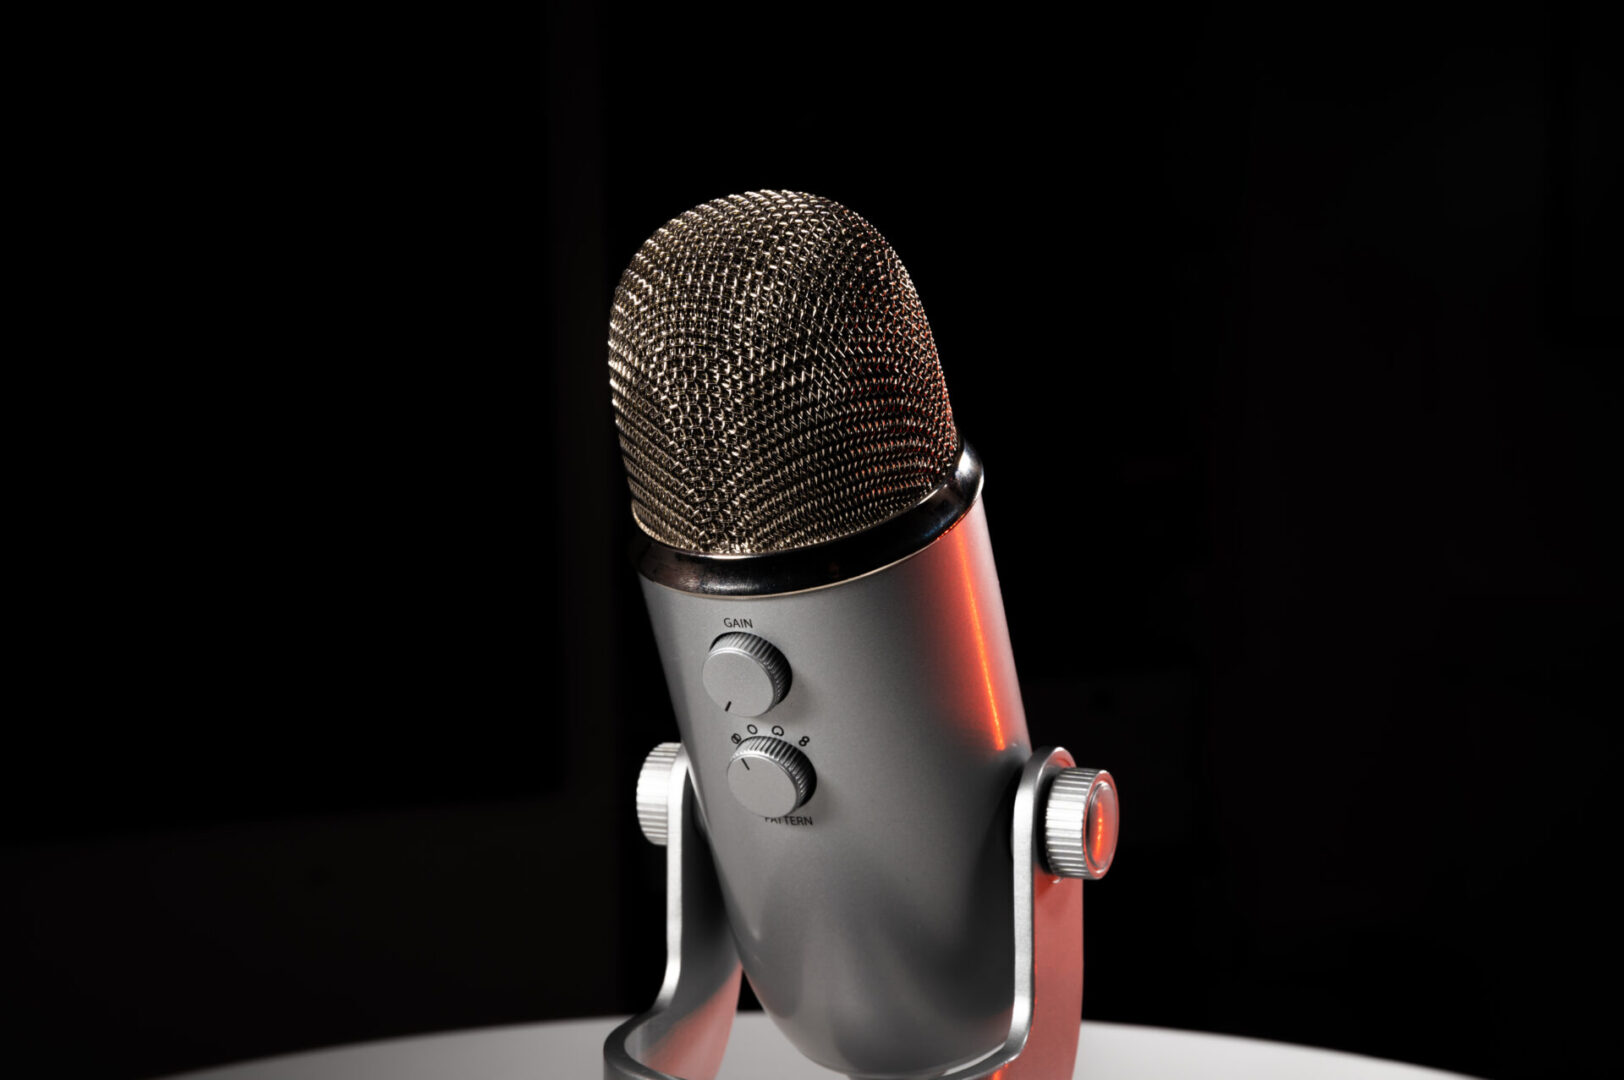 Blue Yeti microphone sitting on a table with a black background